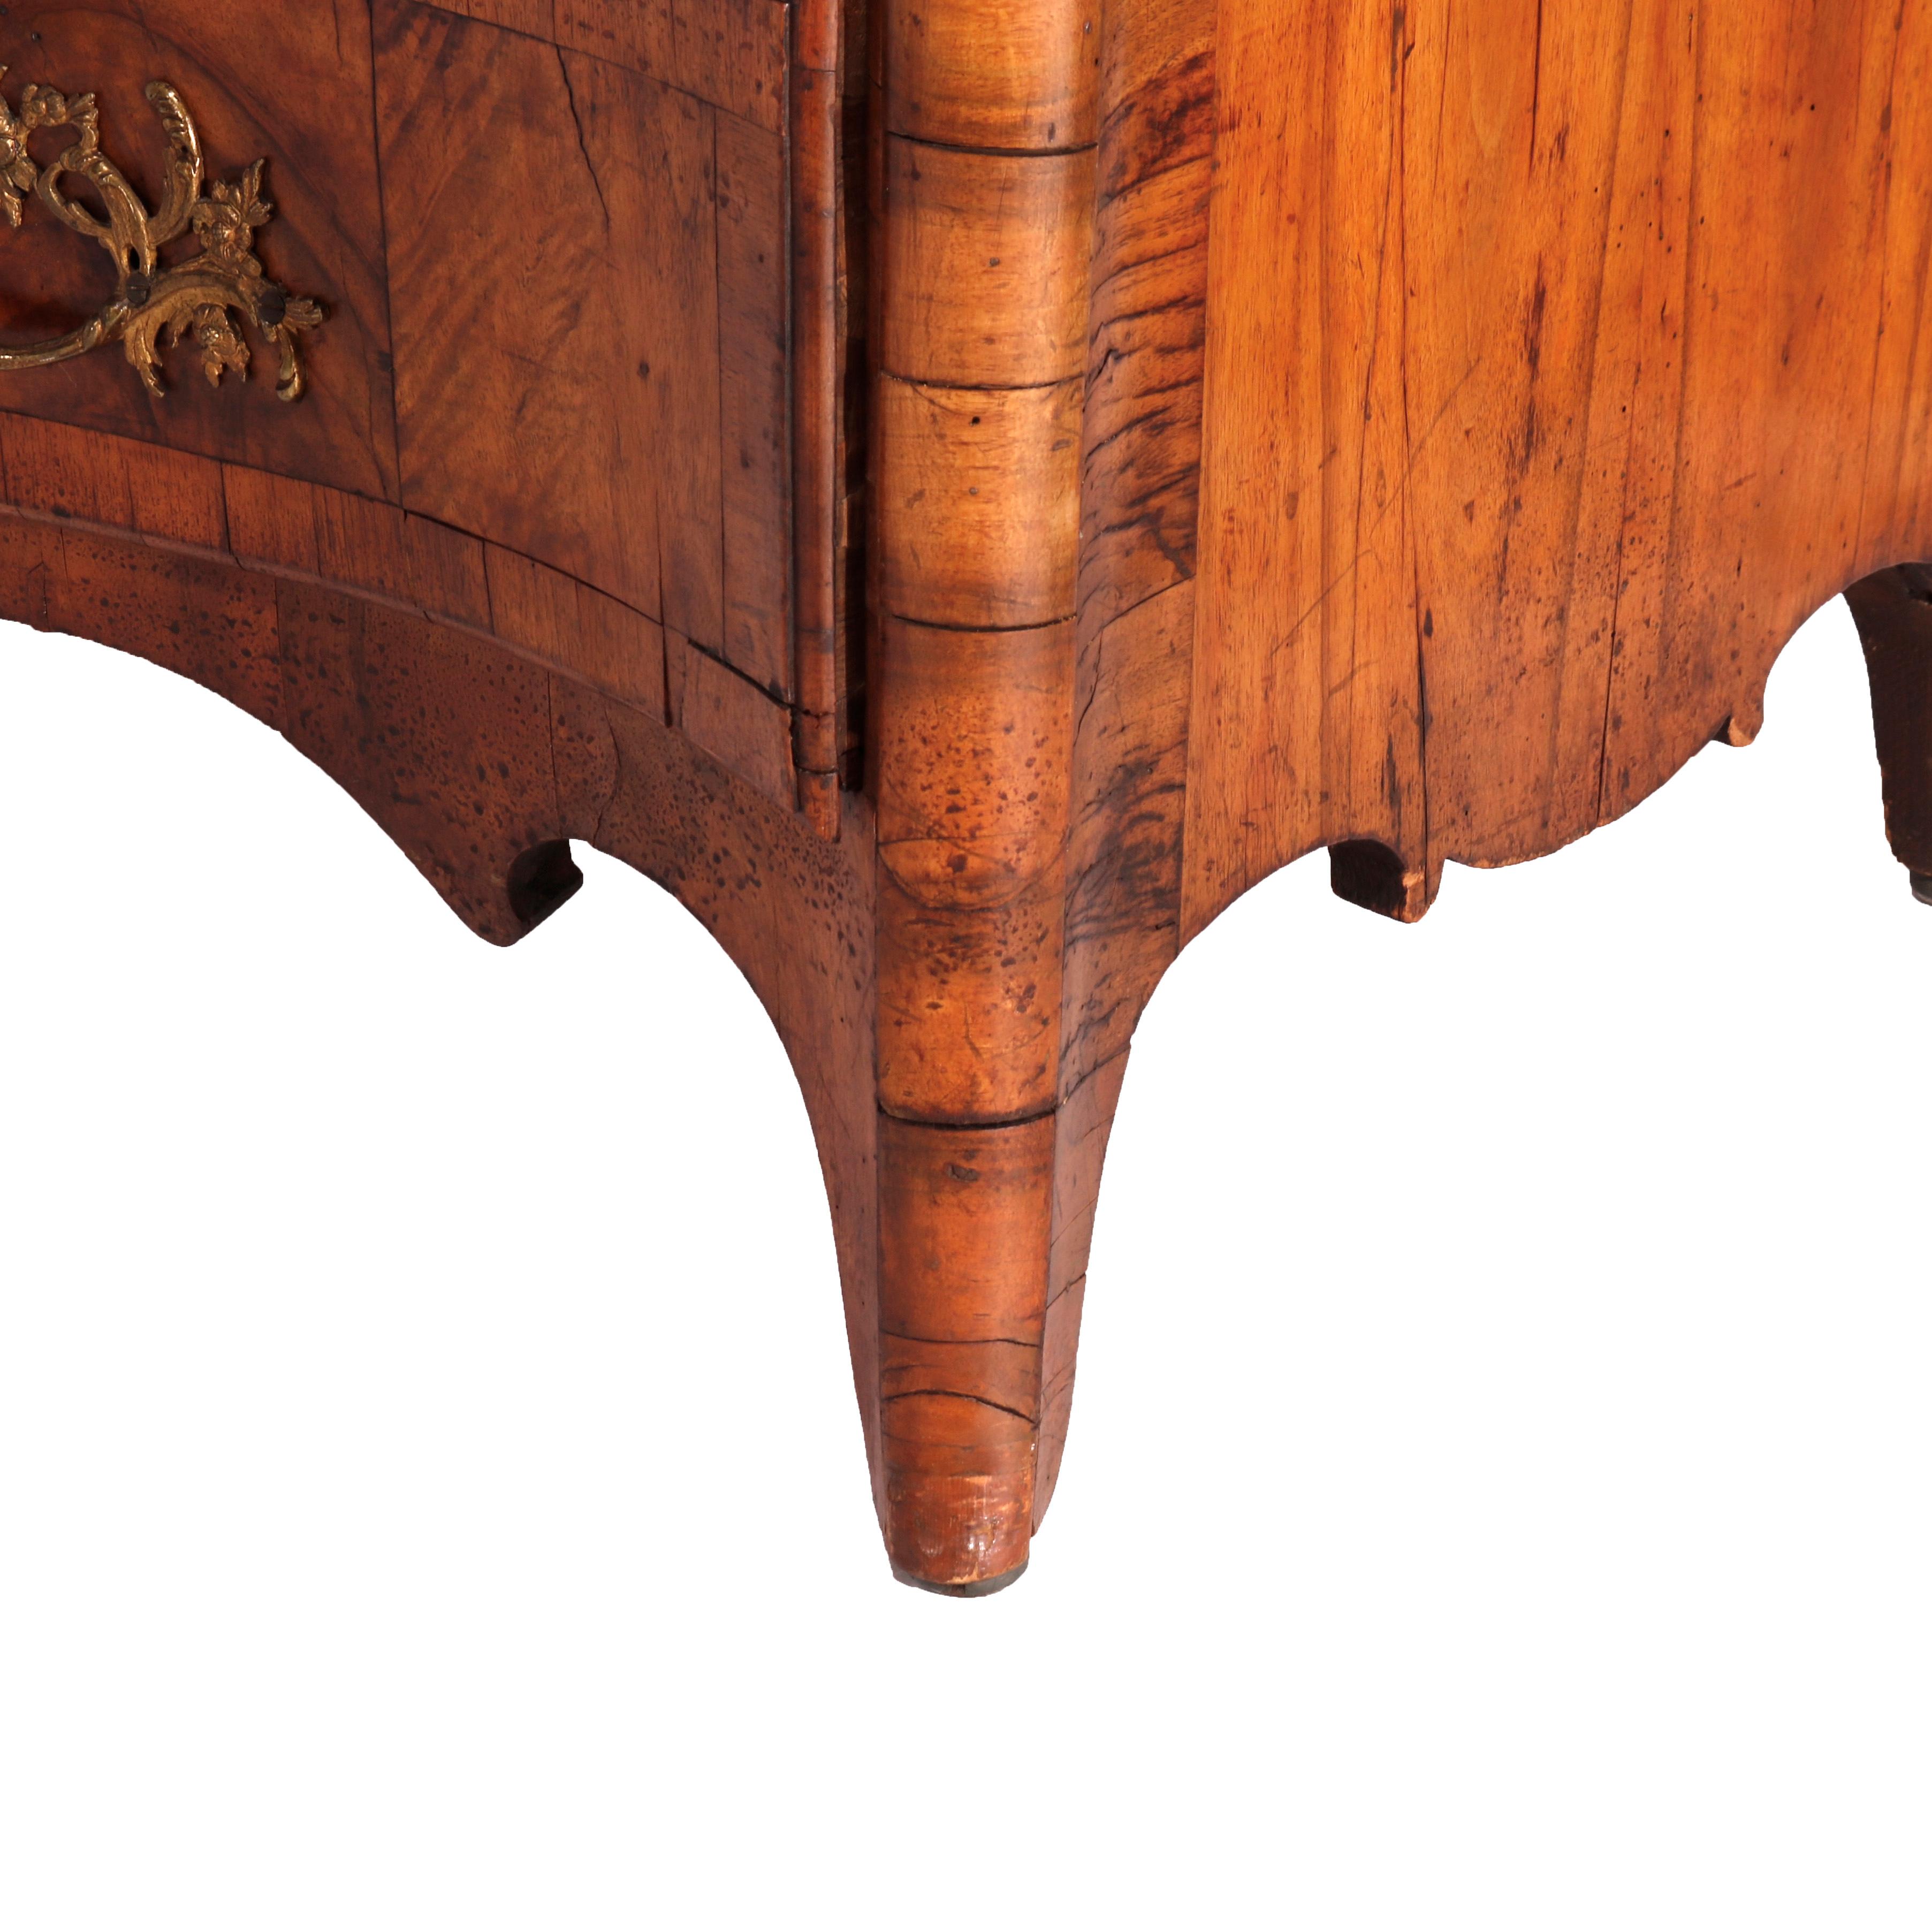 An antique Italian chest of drawers offers kingwood, satinwood and burl construction in bow-front form with cast ormolu mounts and having four banded drawers, raised on bracket feet, 18th/19th century

Measures - 33.75